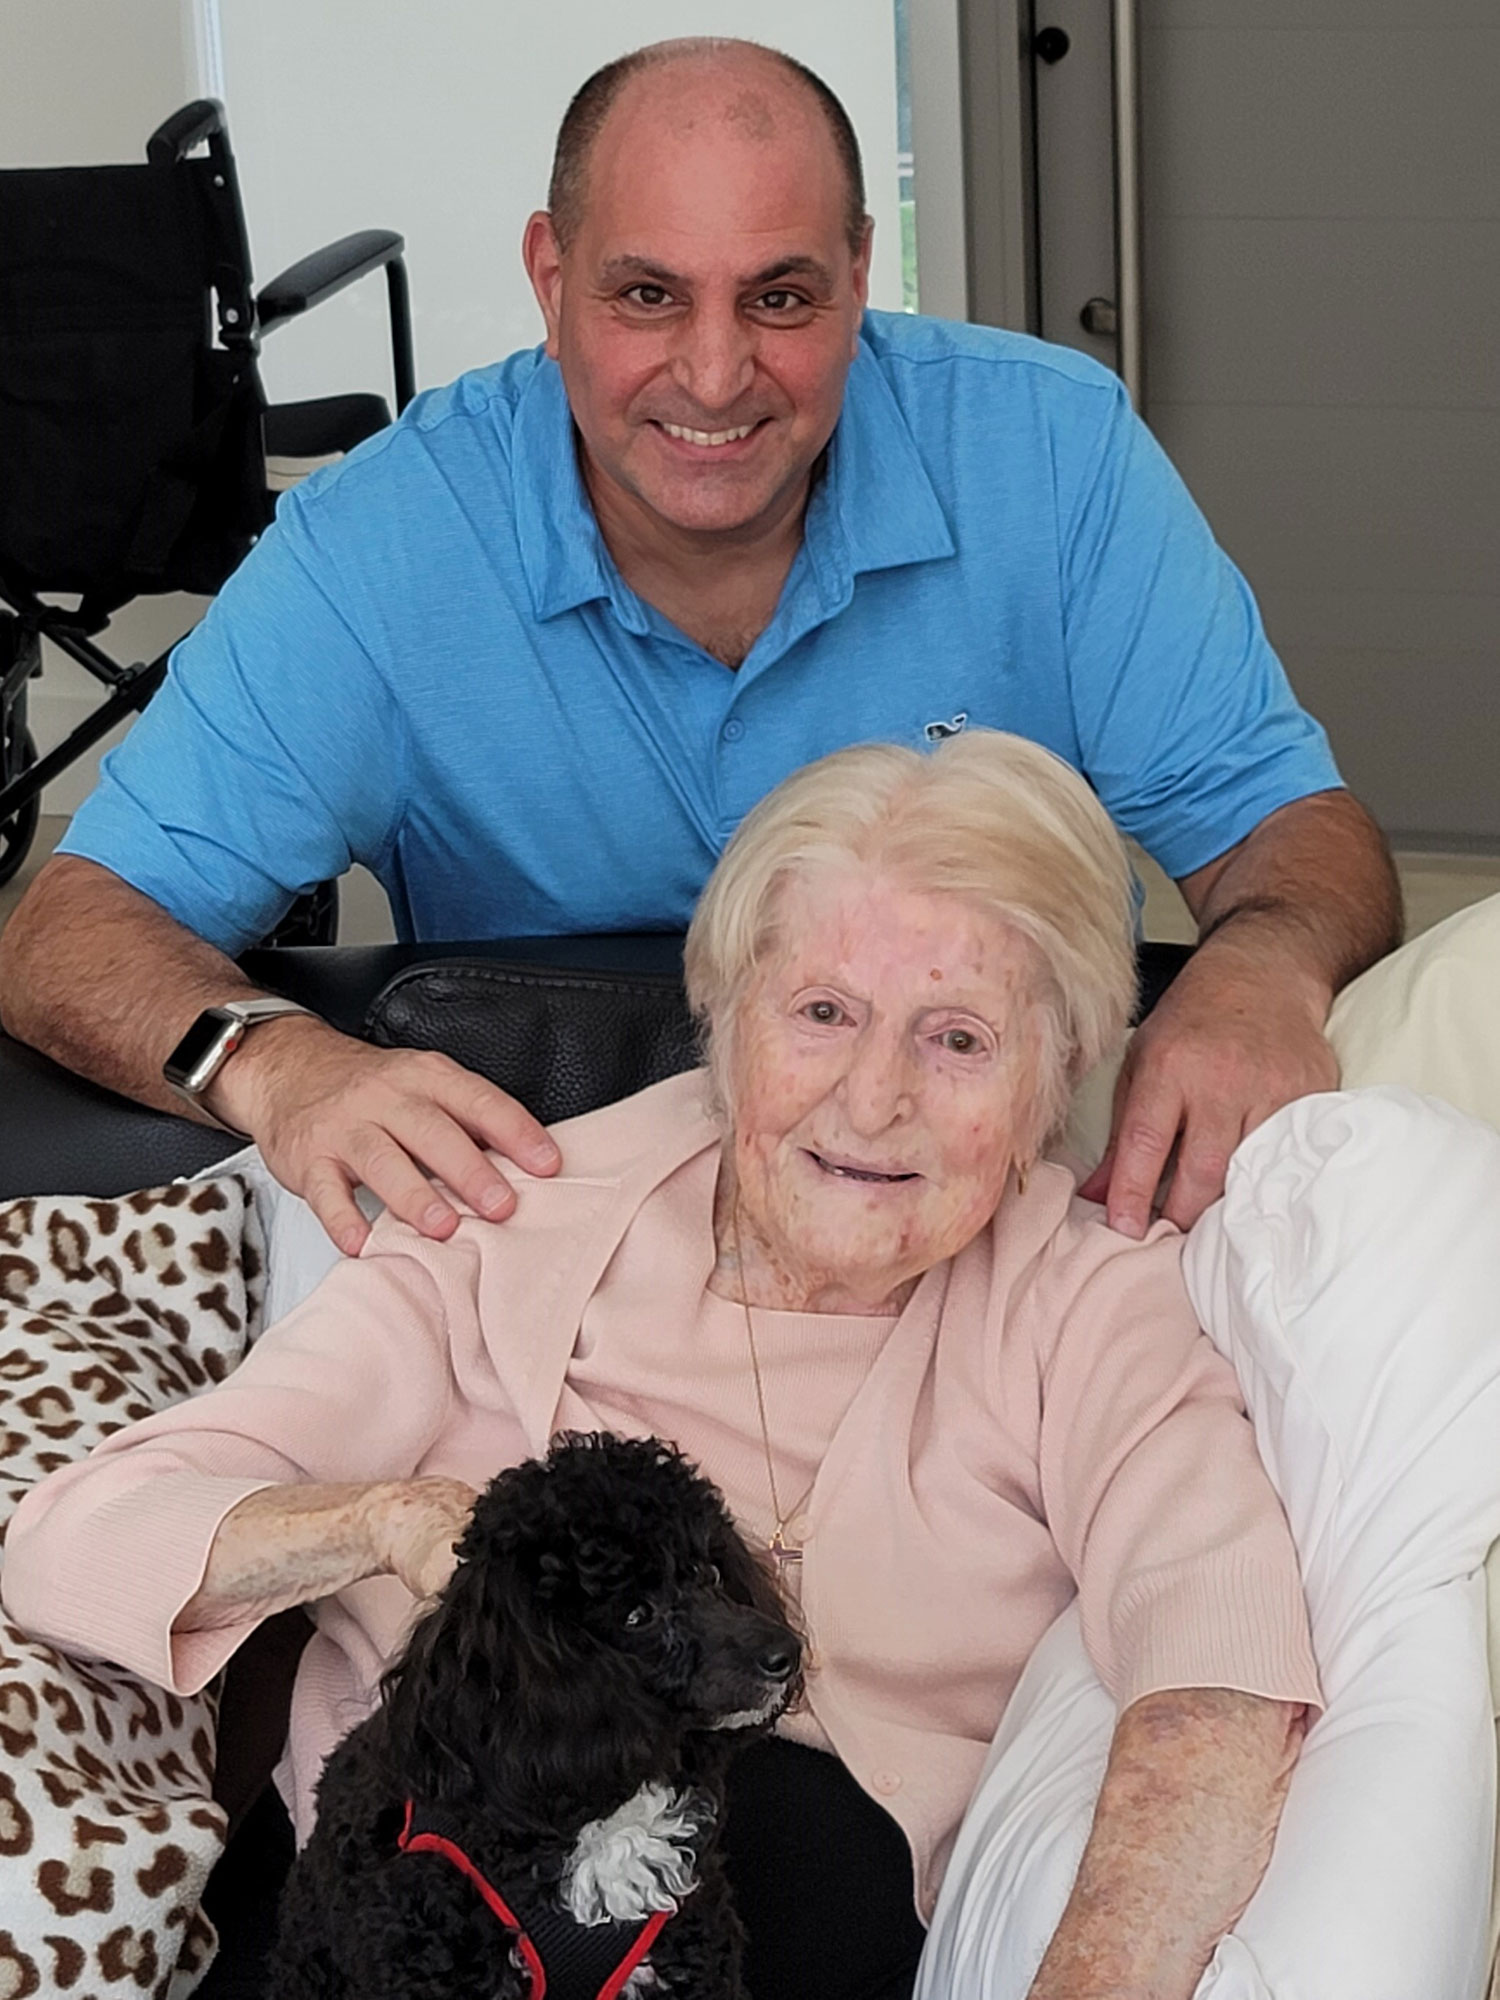 An elderly woman sits with her black dog on her lap while a caretaker smiles.